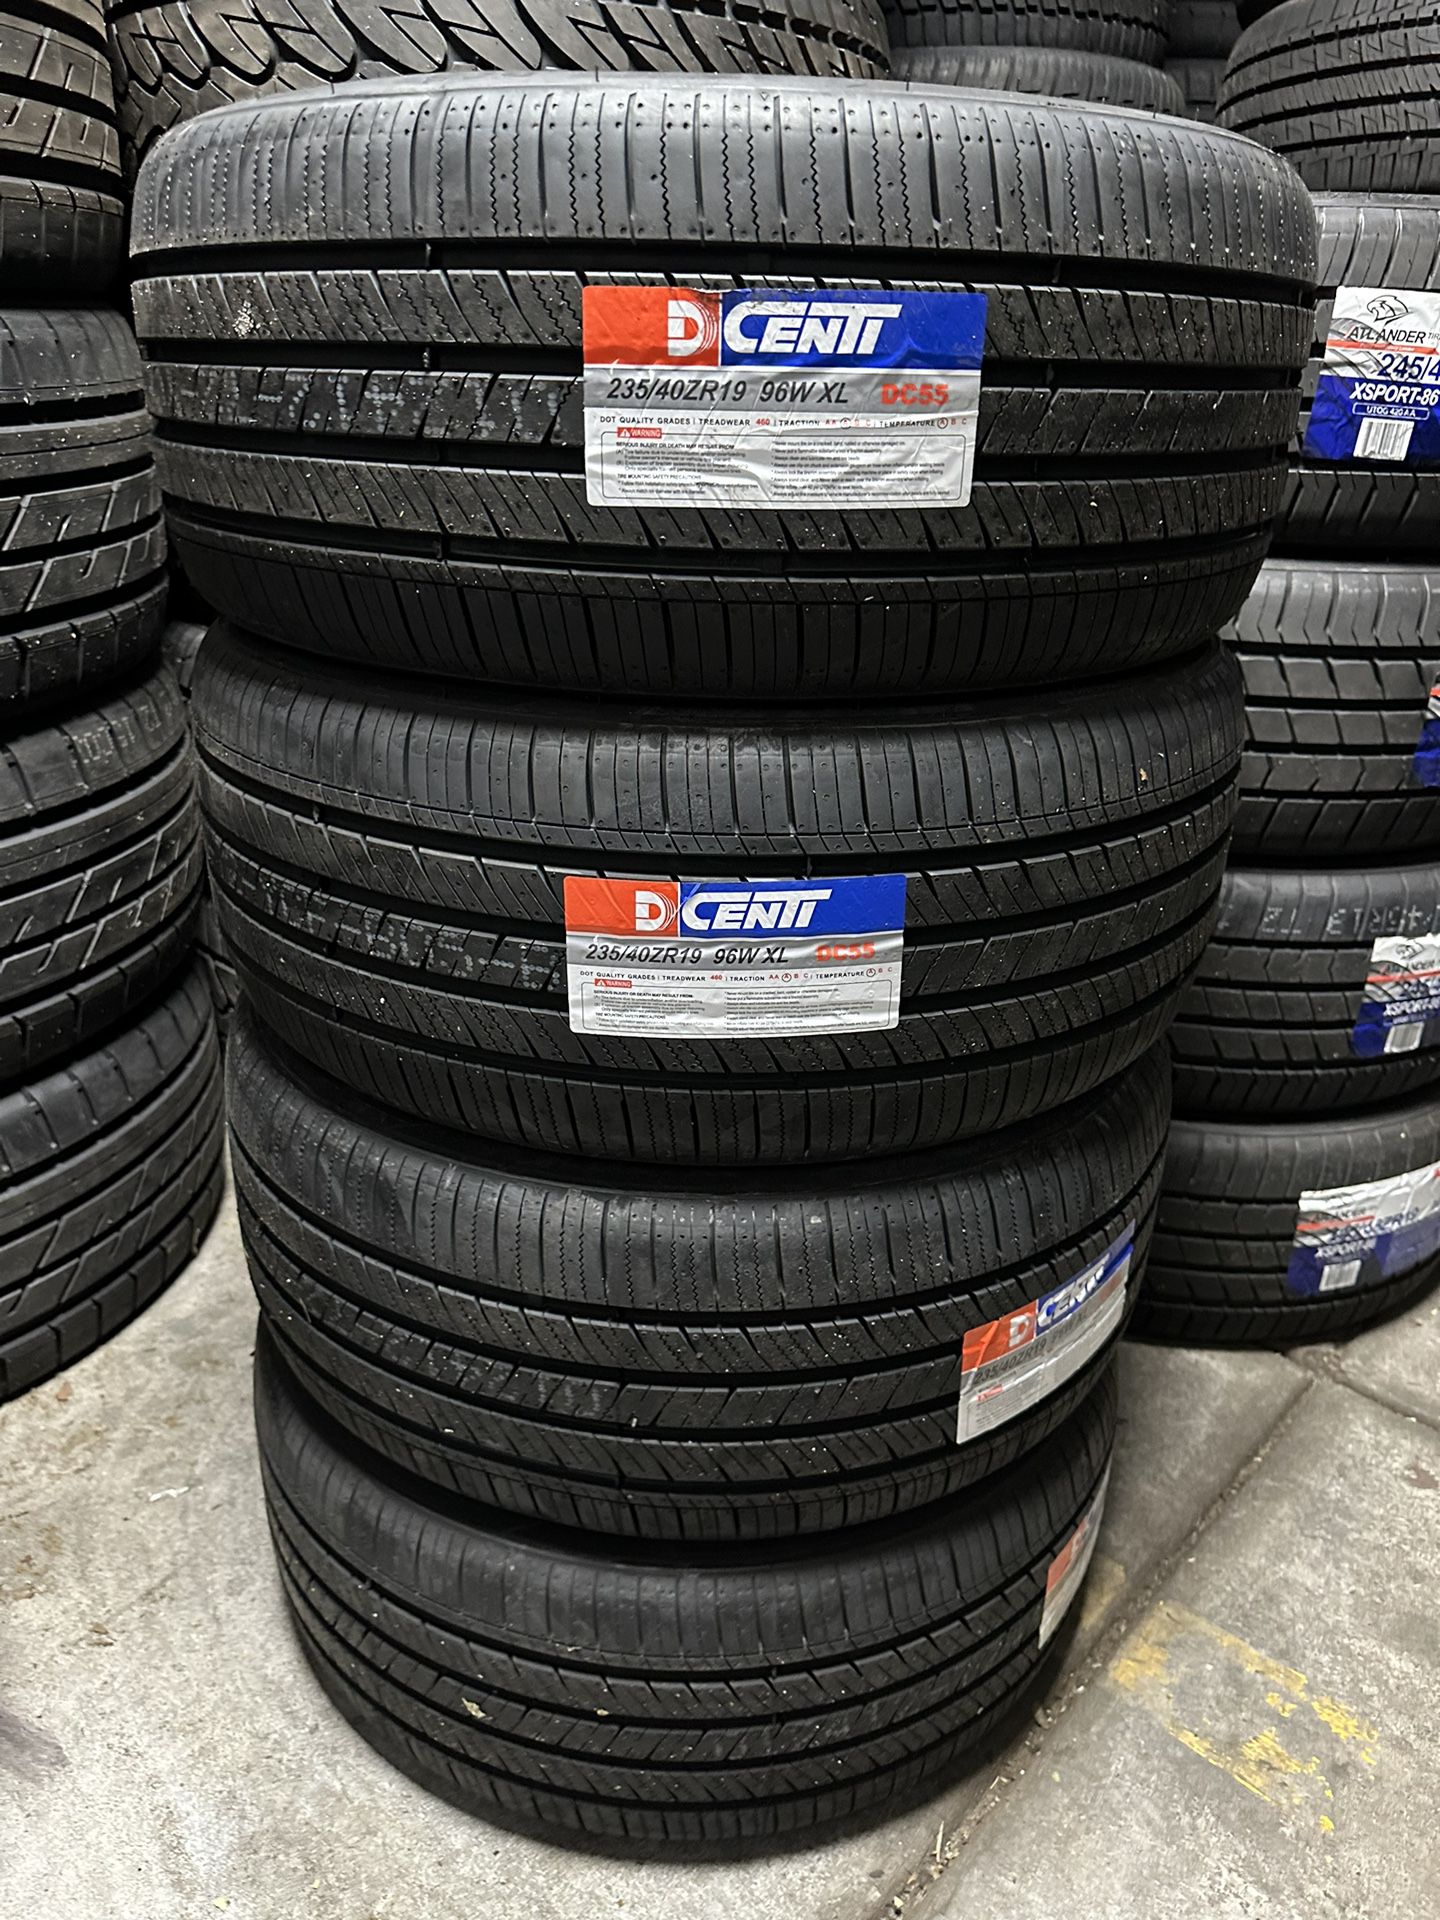 235-40-19 DCENTI ALL-SEASON TIRE SETS ON SALE‼️ ALL MAJOR BRANDS AND SIZES AVAILABLE‼️